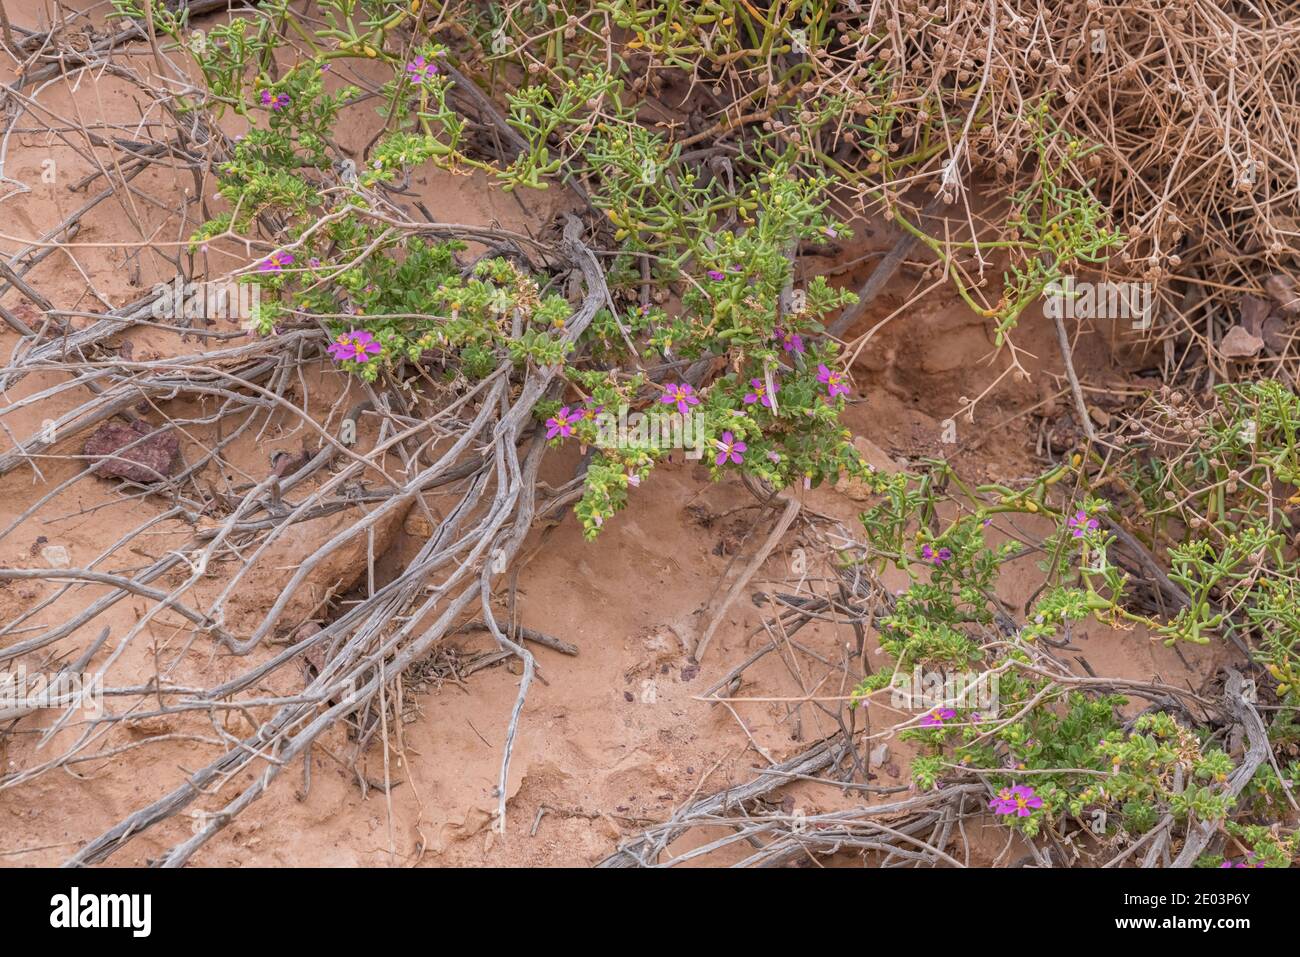 Fagonia. a genus of wild, flowering plants, have been used ethnobotanically by traditional practitioners under Ayurvedic. Desert vegetation in drought Stock Photo